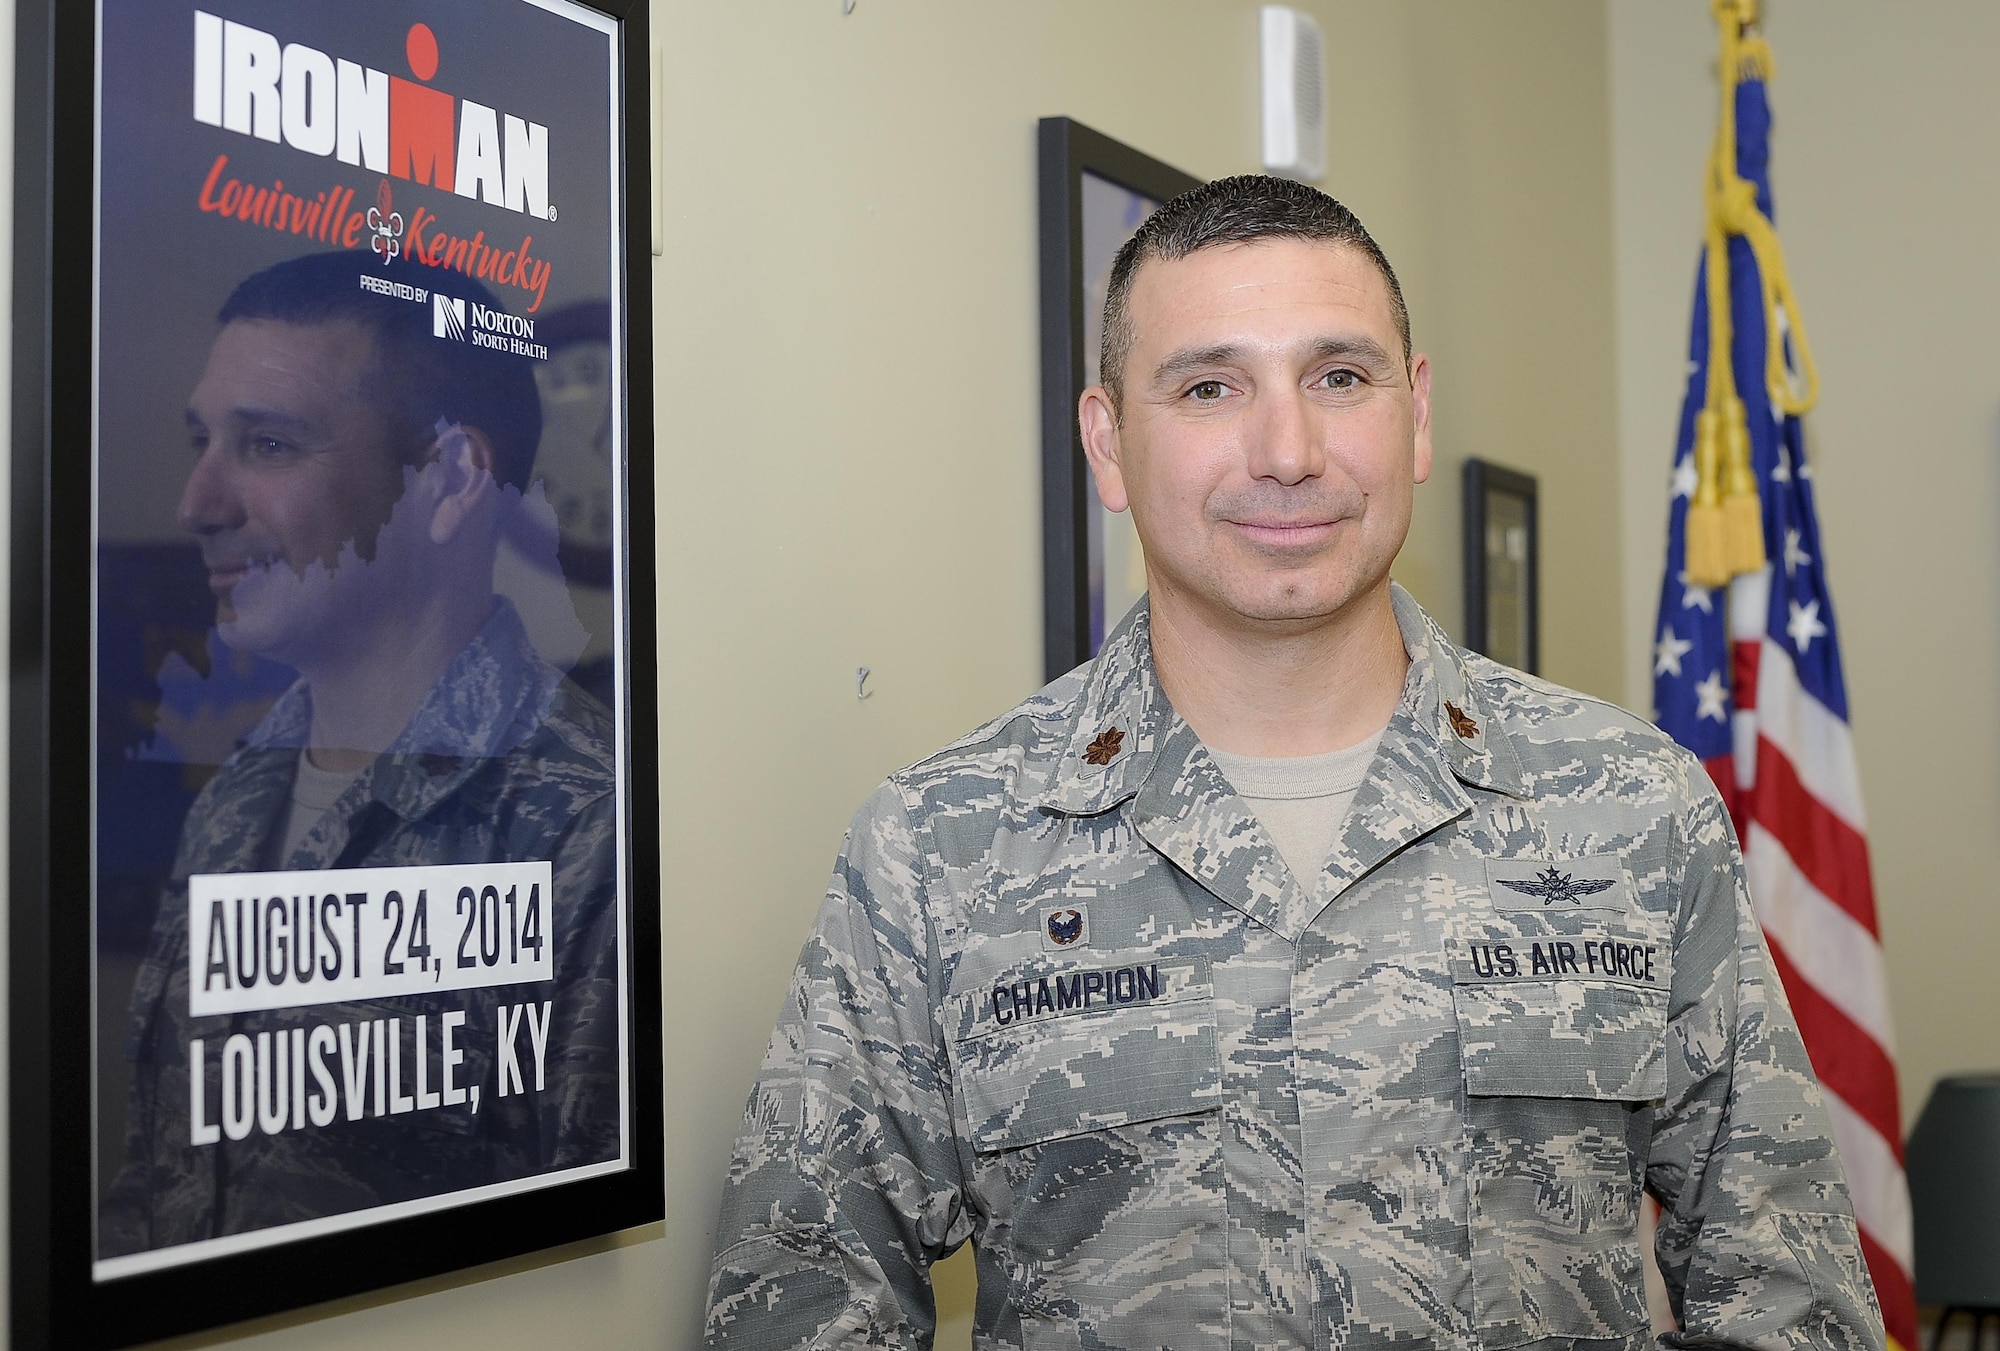 Maj. Reynaldo Champion, commander of the 6th Communications Squadron, pauses for a photo in front of an Ironman poster in his office at MacDill Air Force Base, Fla., Nov. 11, 2016. Champion has traveled all over the country and trains year-round to compete in the races he’s passionate about. (U.S. Air Force photo by Airman 1st Class Mariette Adams)